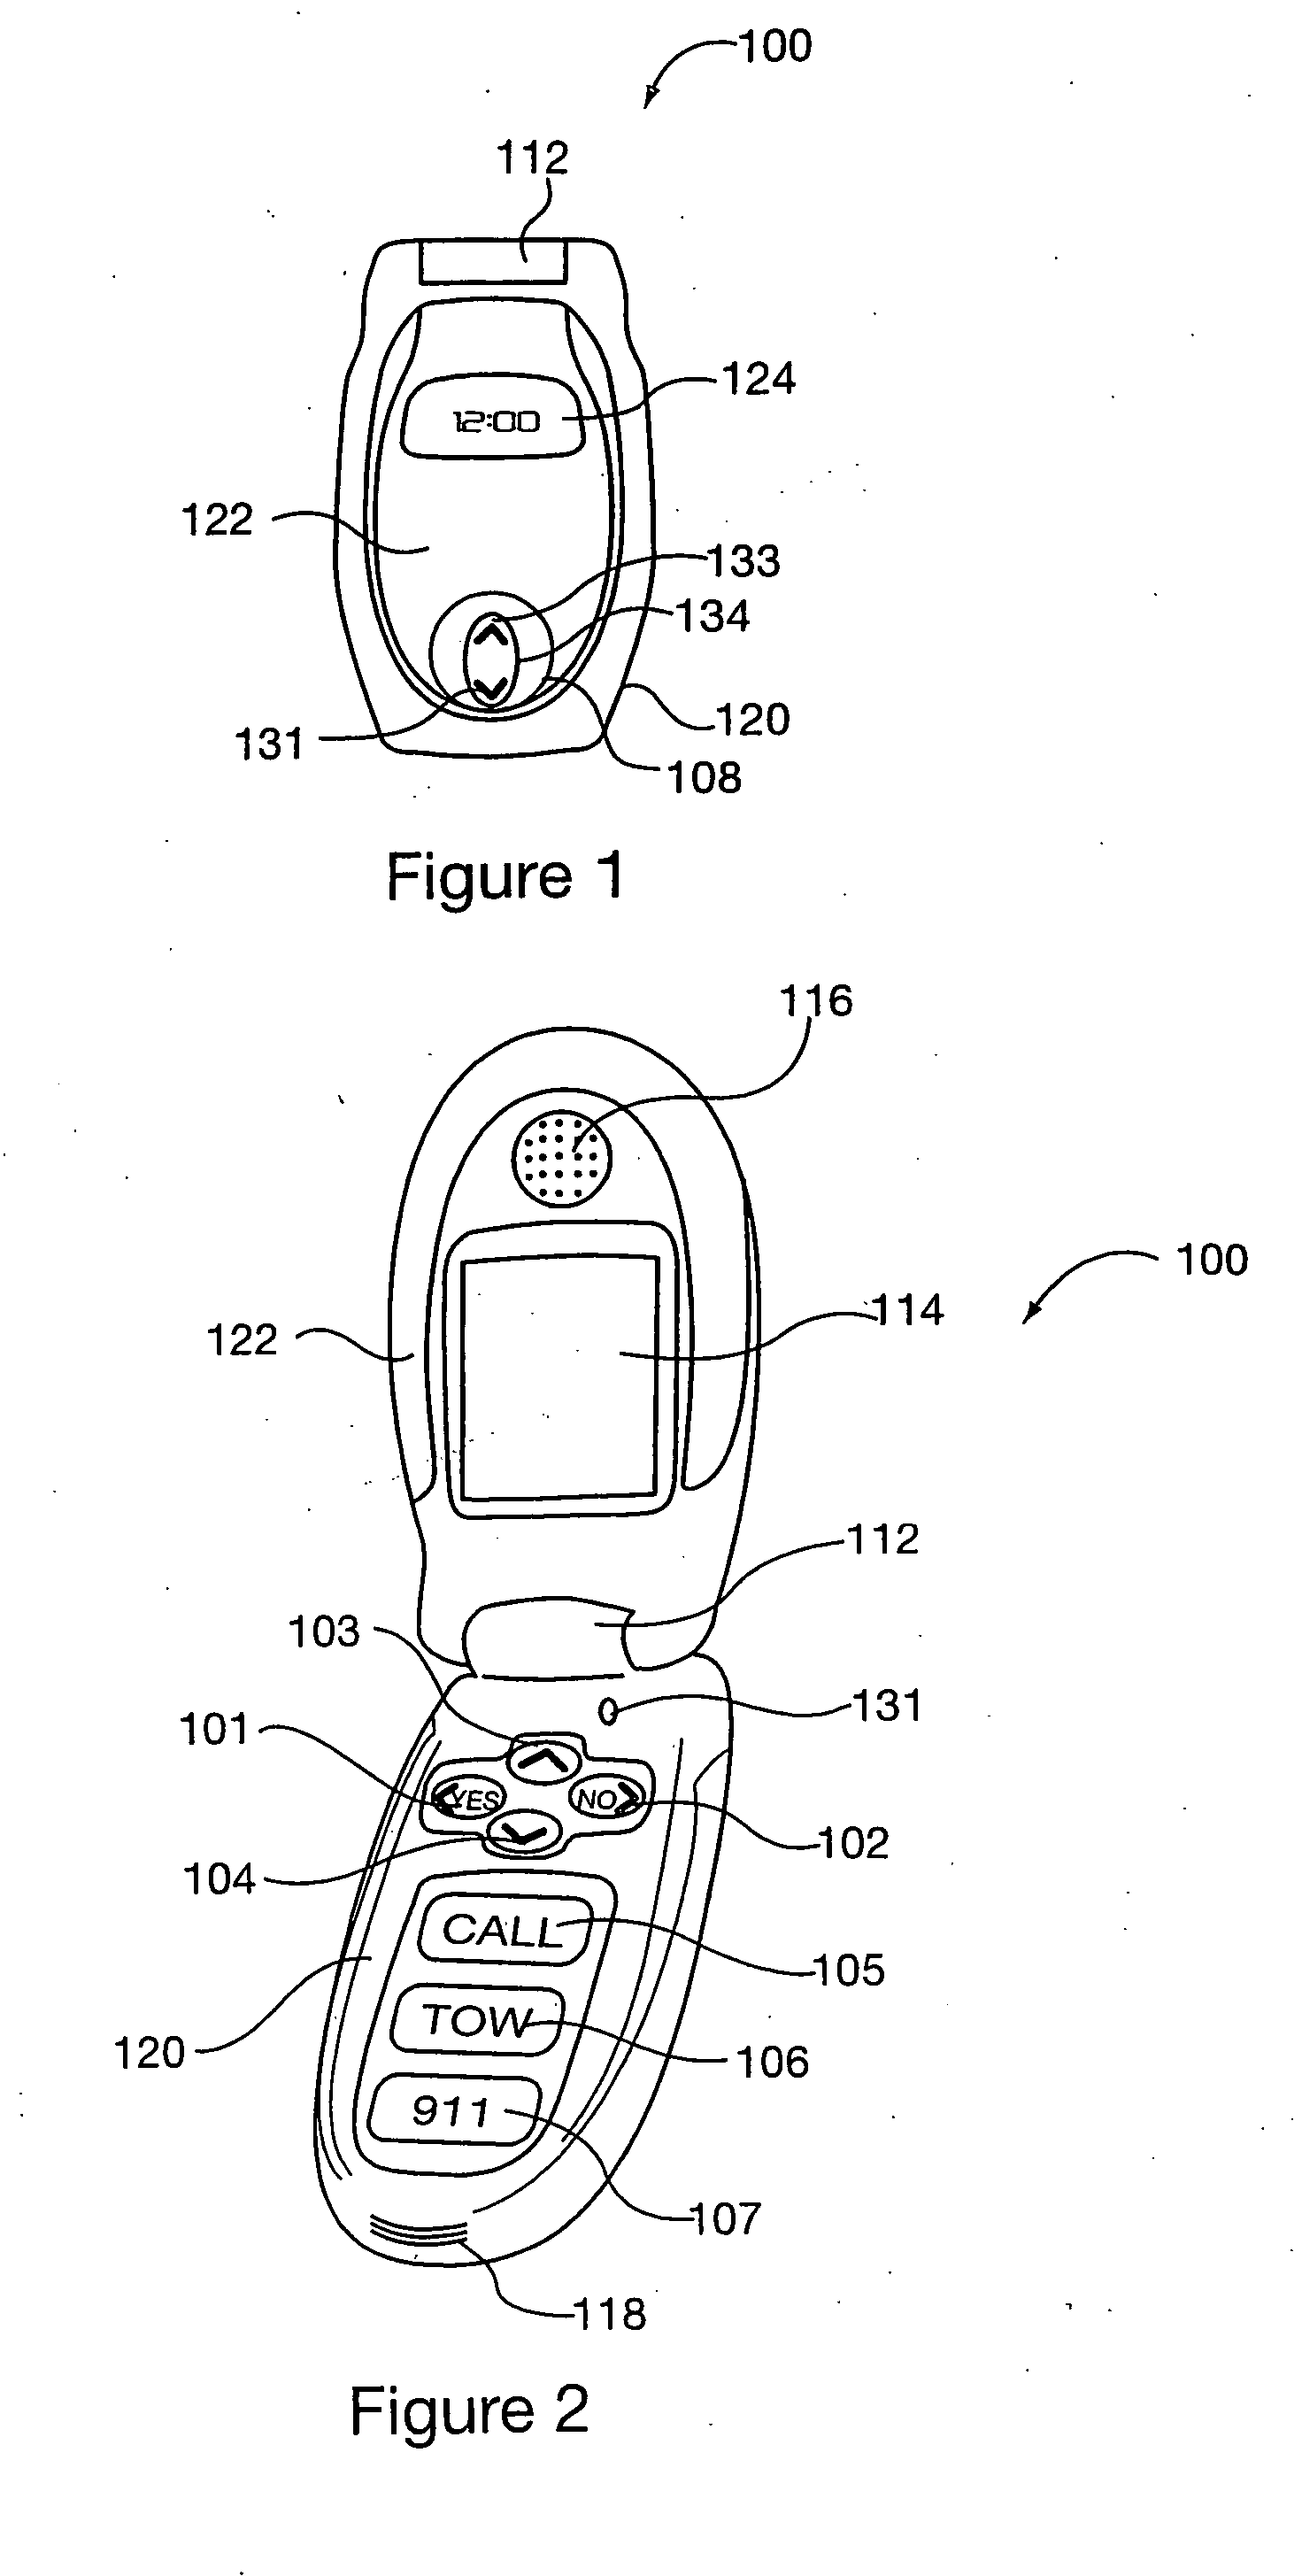 Methods and apparatus for updating a communications device using SMS messages